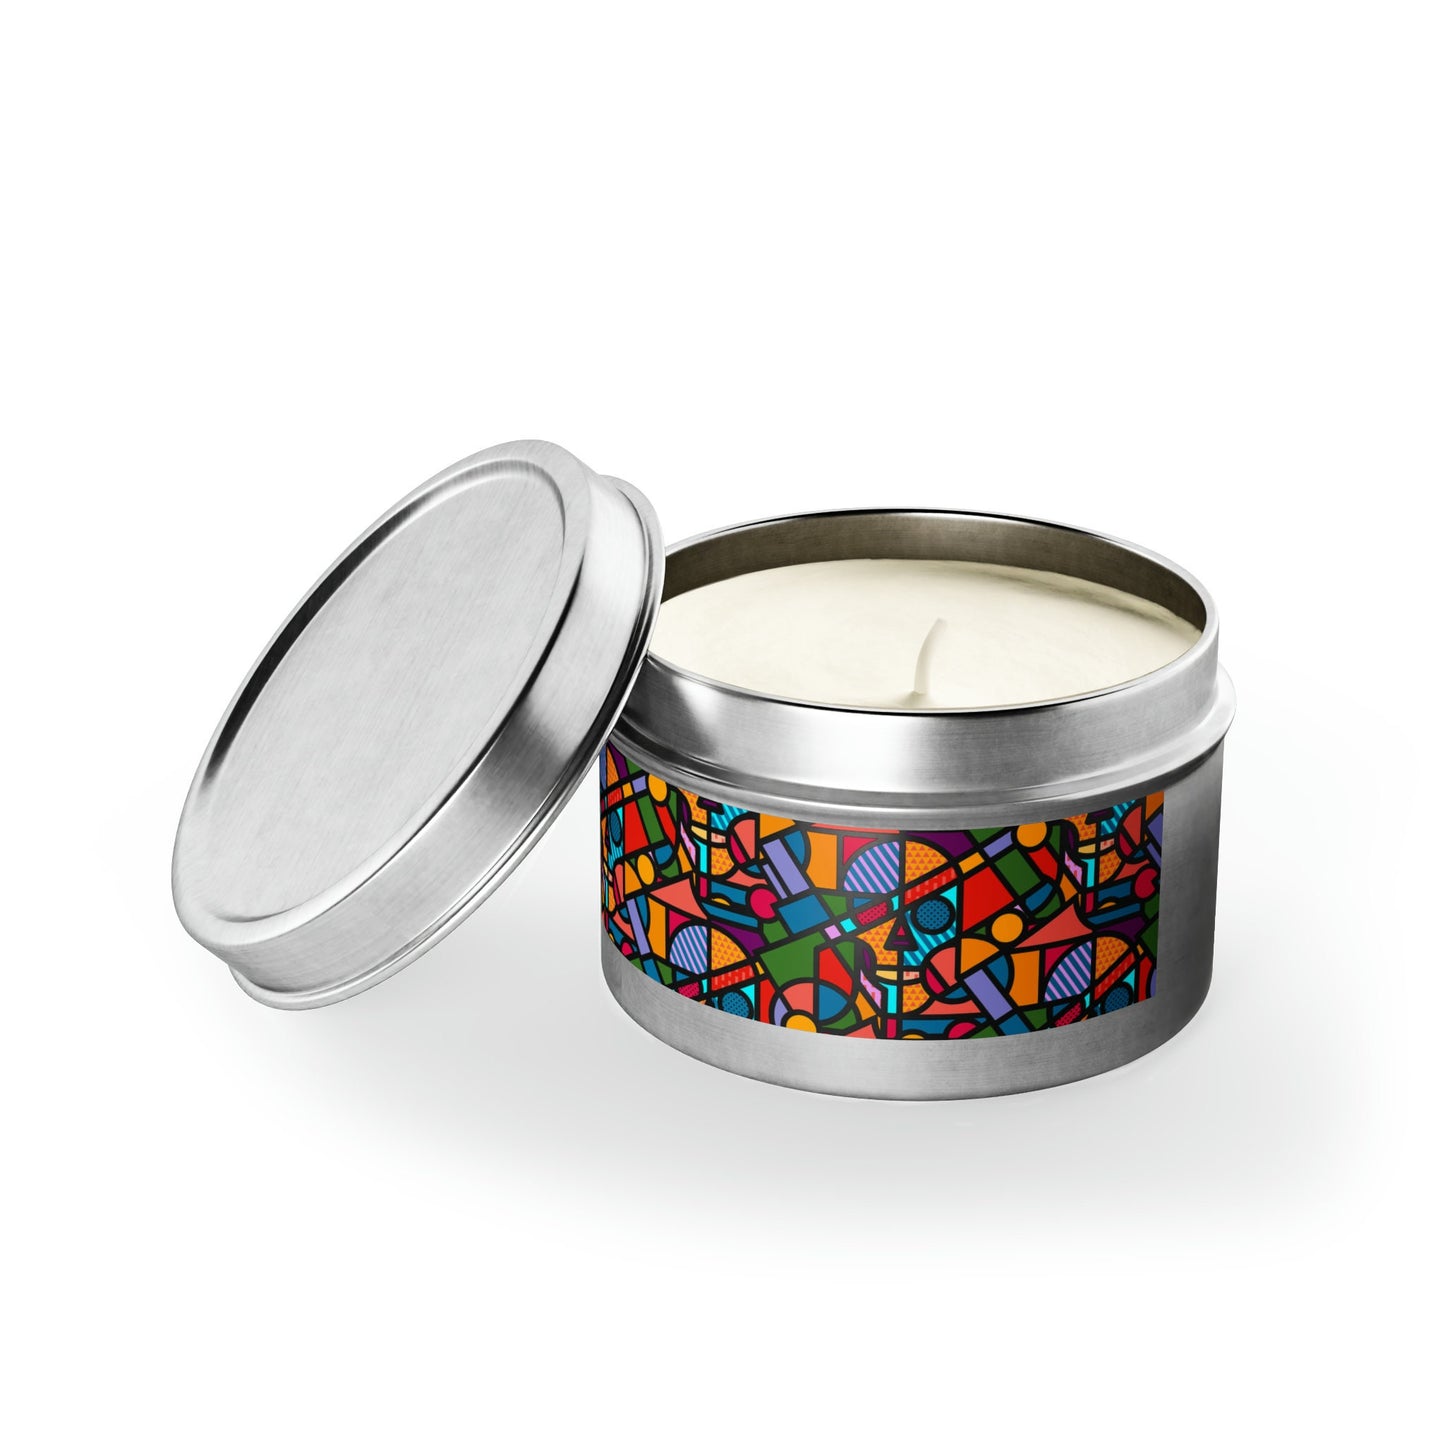 Skull Tin Candles, Pop Art Style Natural Soy Wax Candle Gift